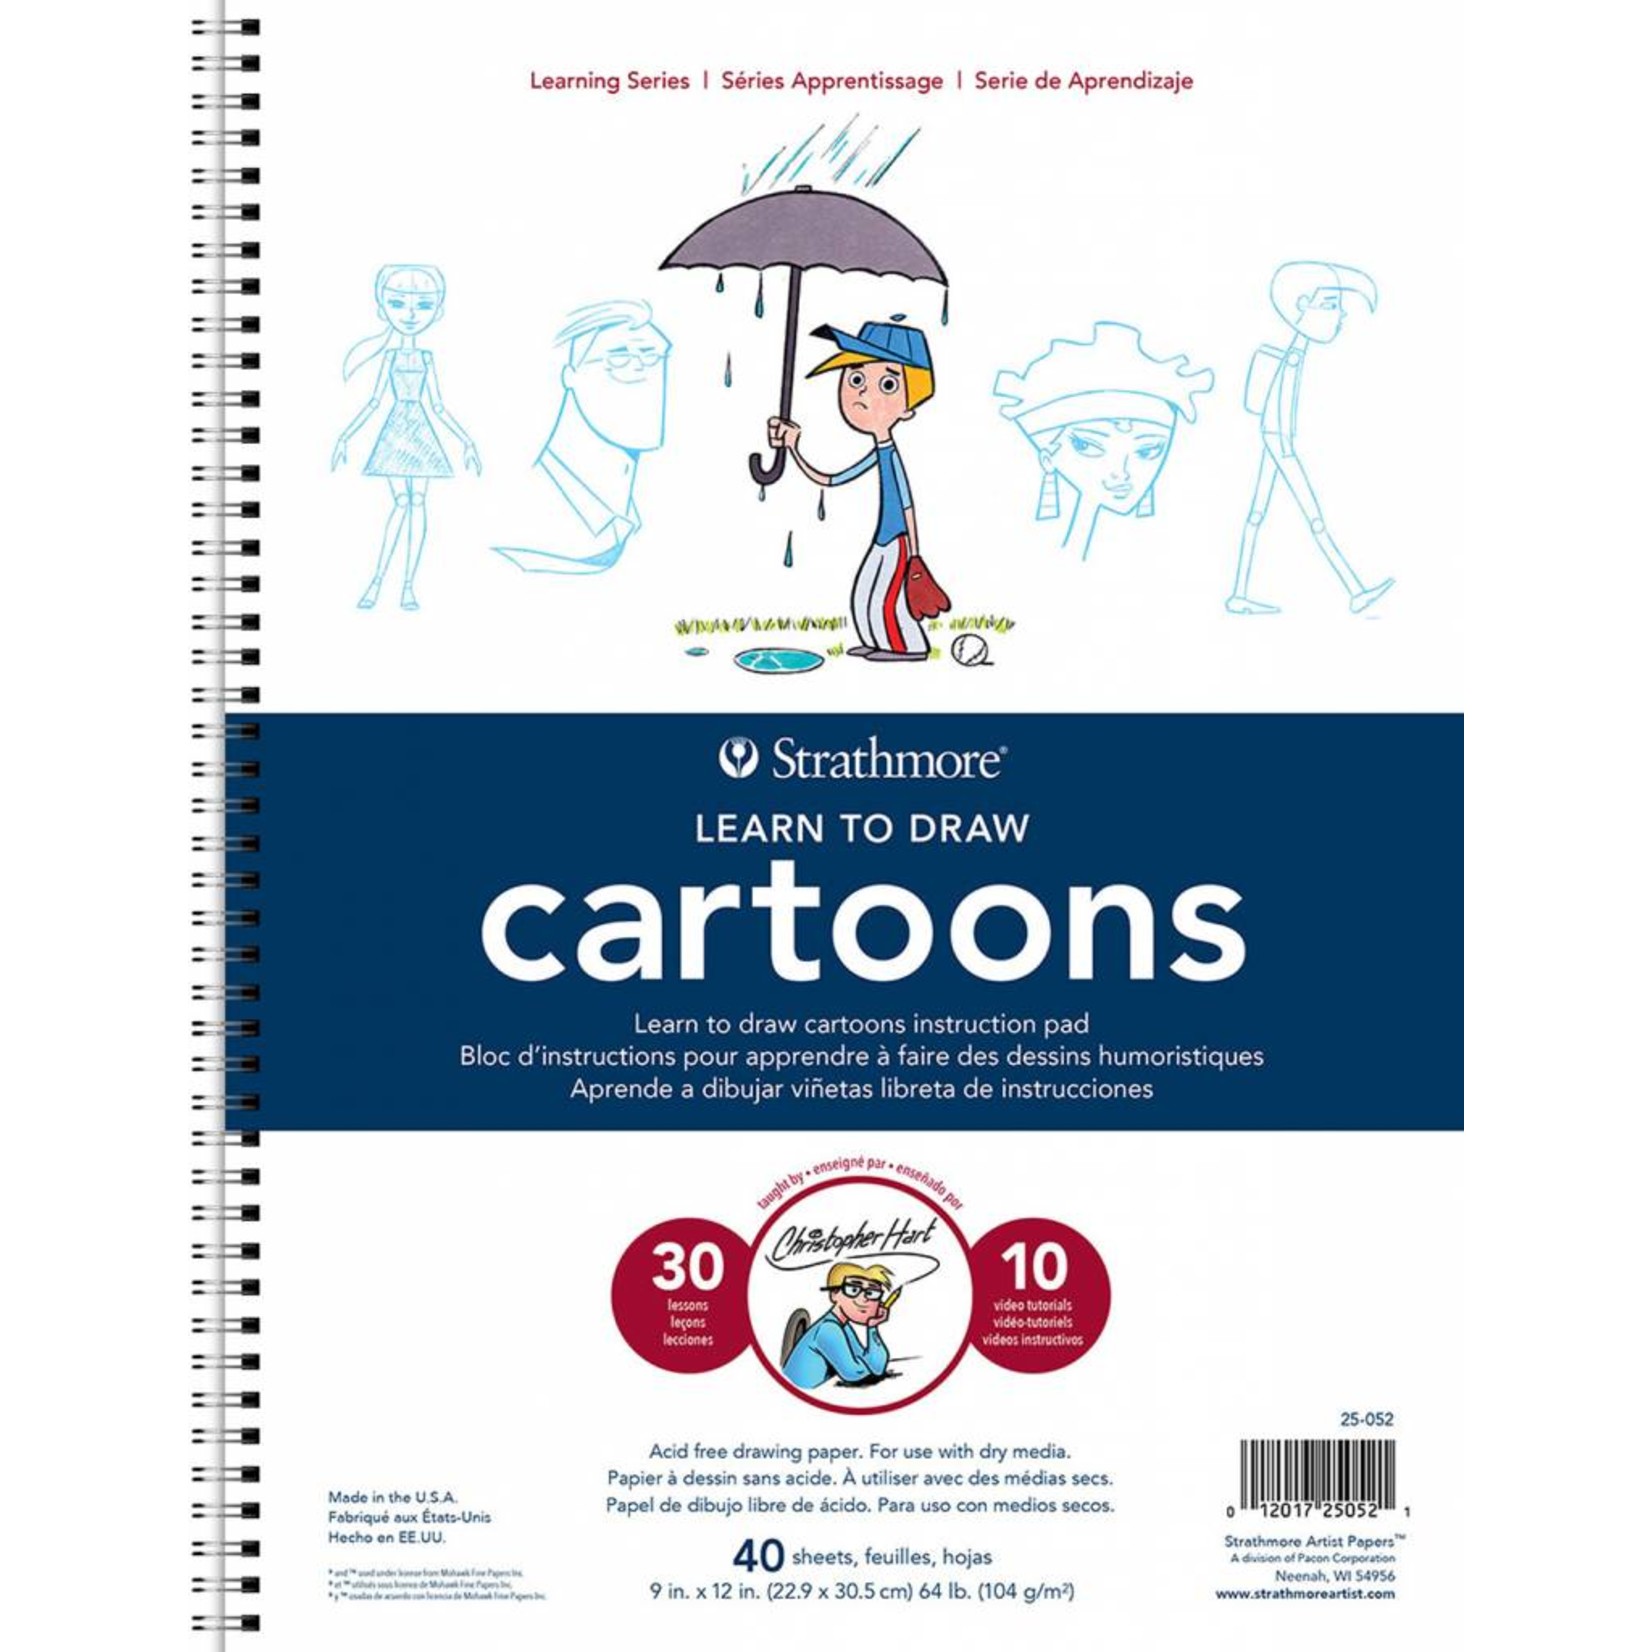 STRATHMORE STRATHMORE LEARNING SERIES LEARN TO DRAW CARTOONS 9X12 COIL BOUND